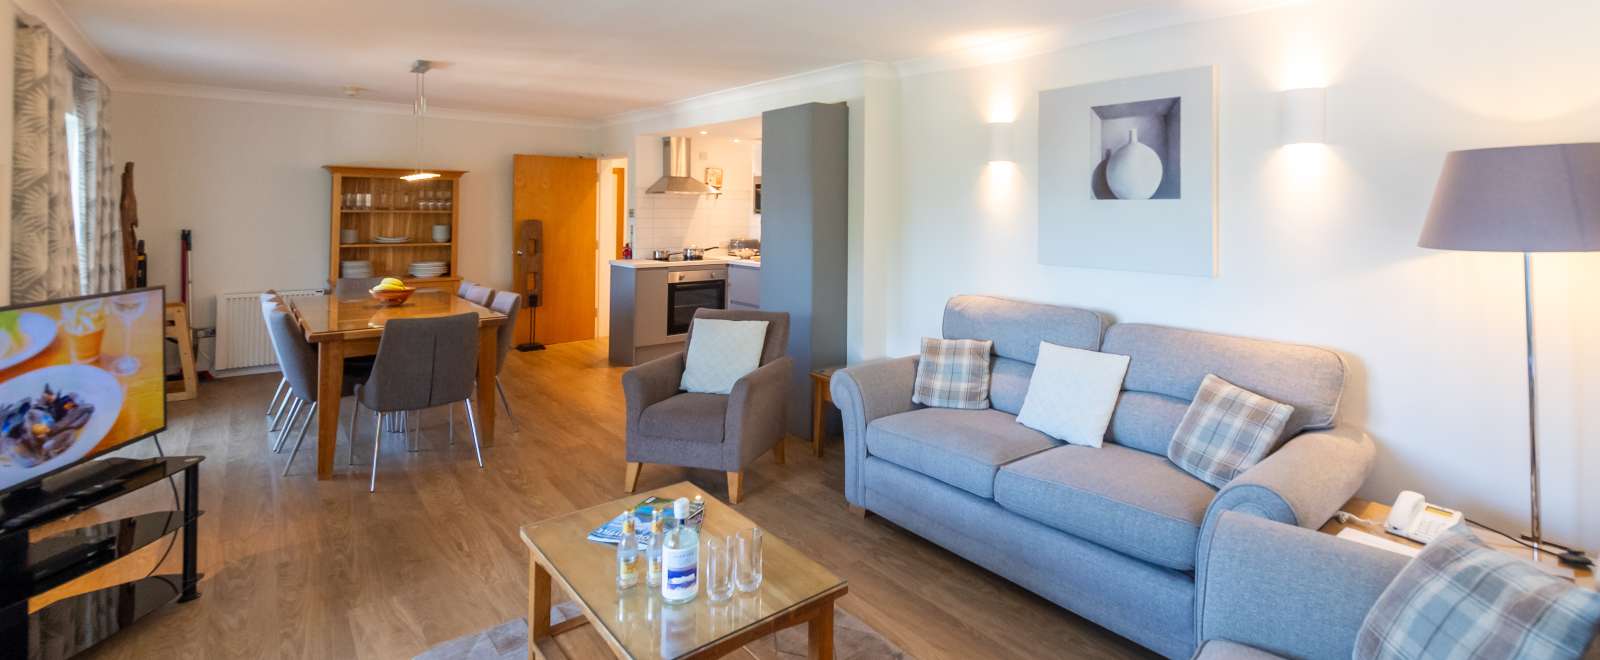 Inside a modern self-catering apartment at Saunton Sands 